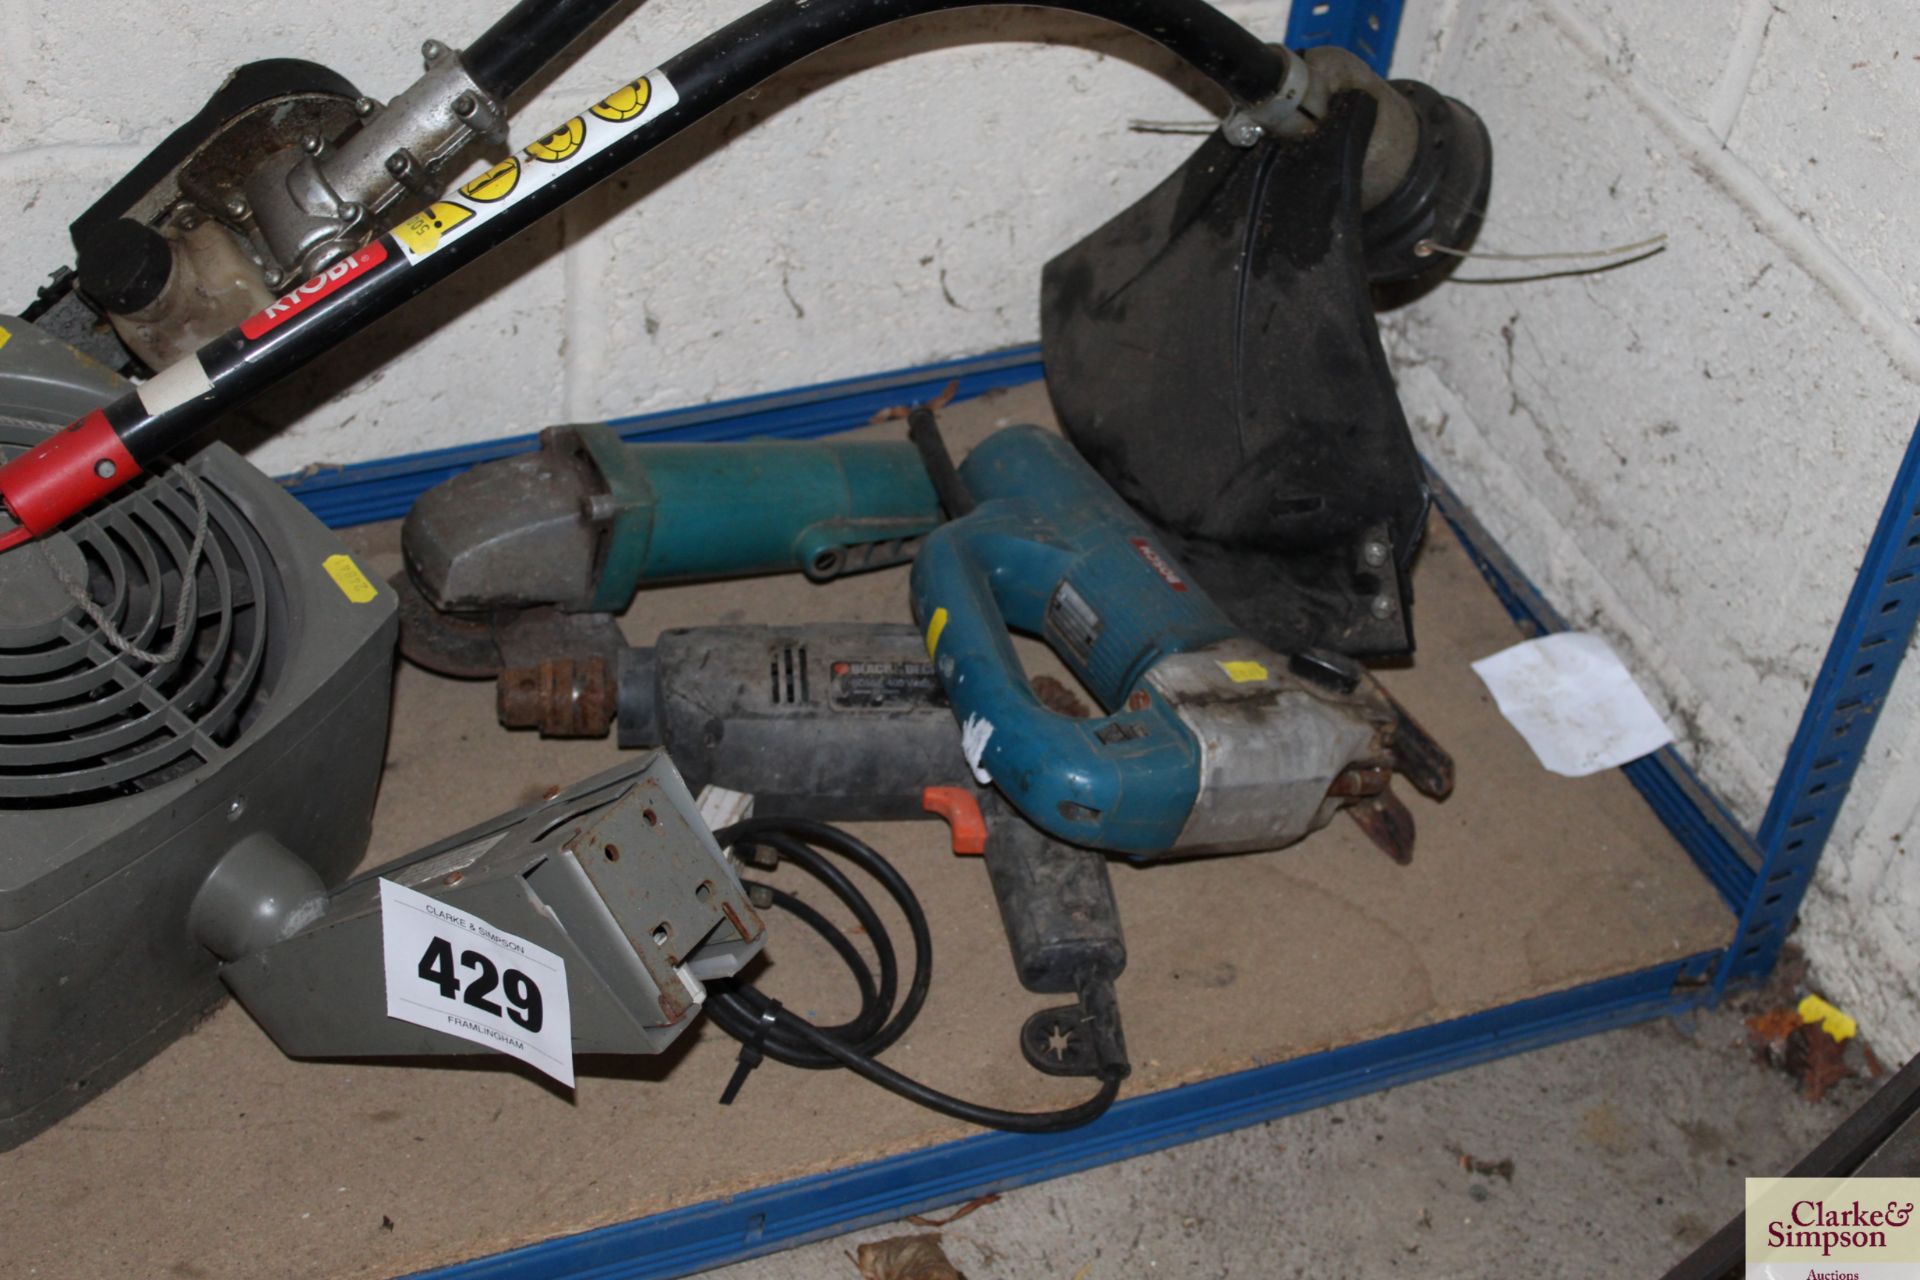 Strimmer attachments, heater, old power tools etc. - Image 3 of 3